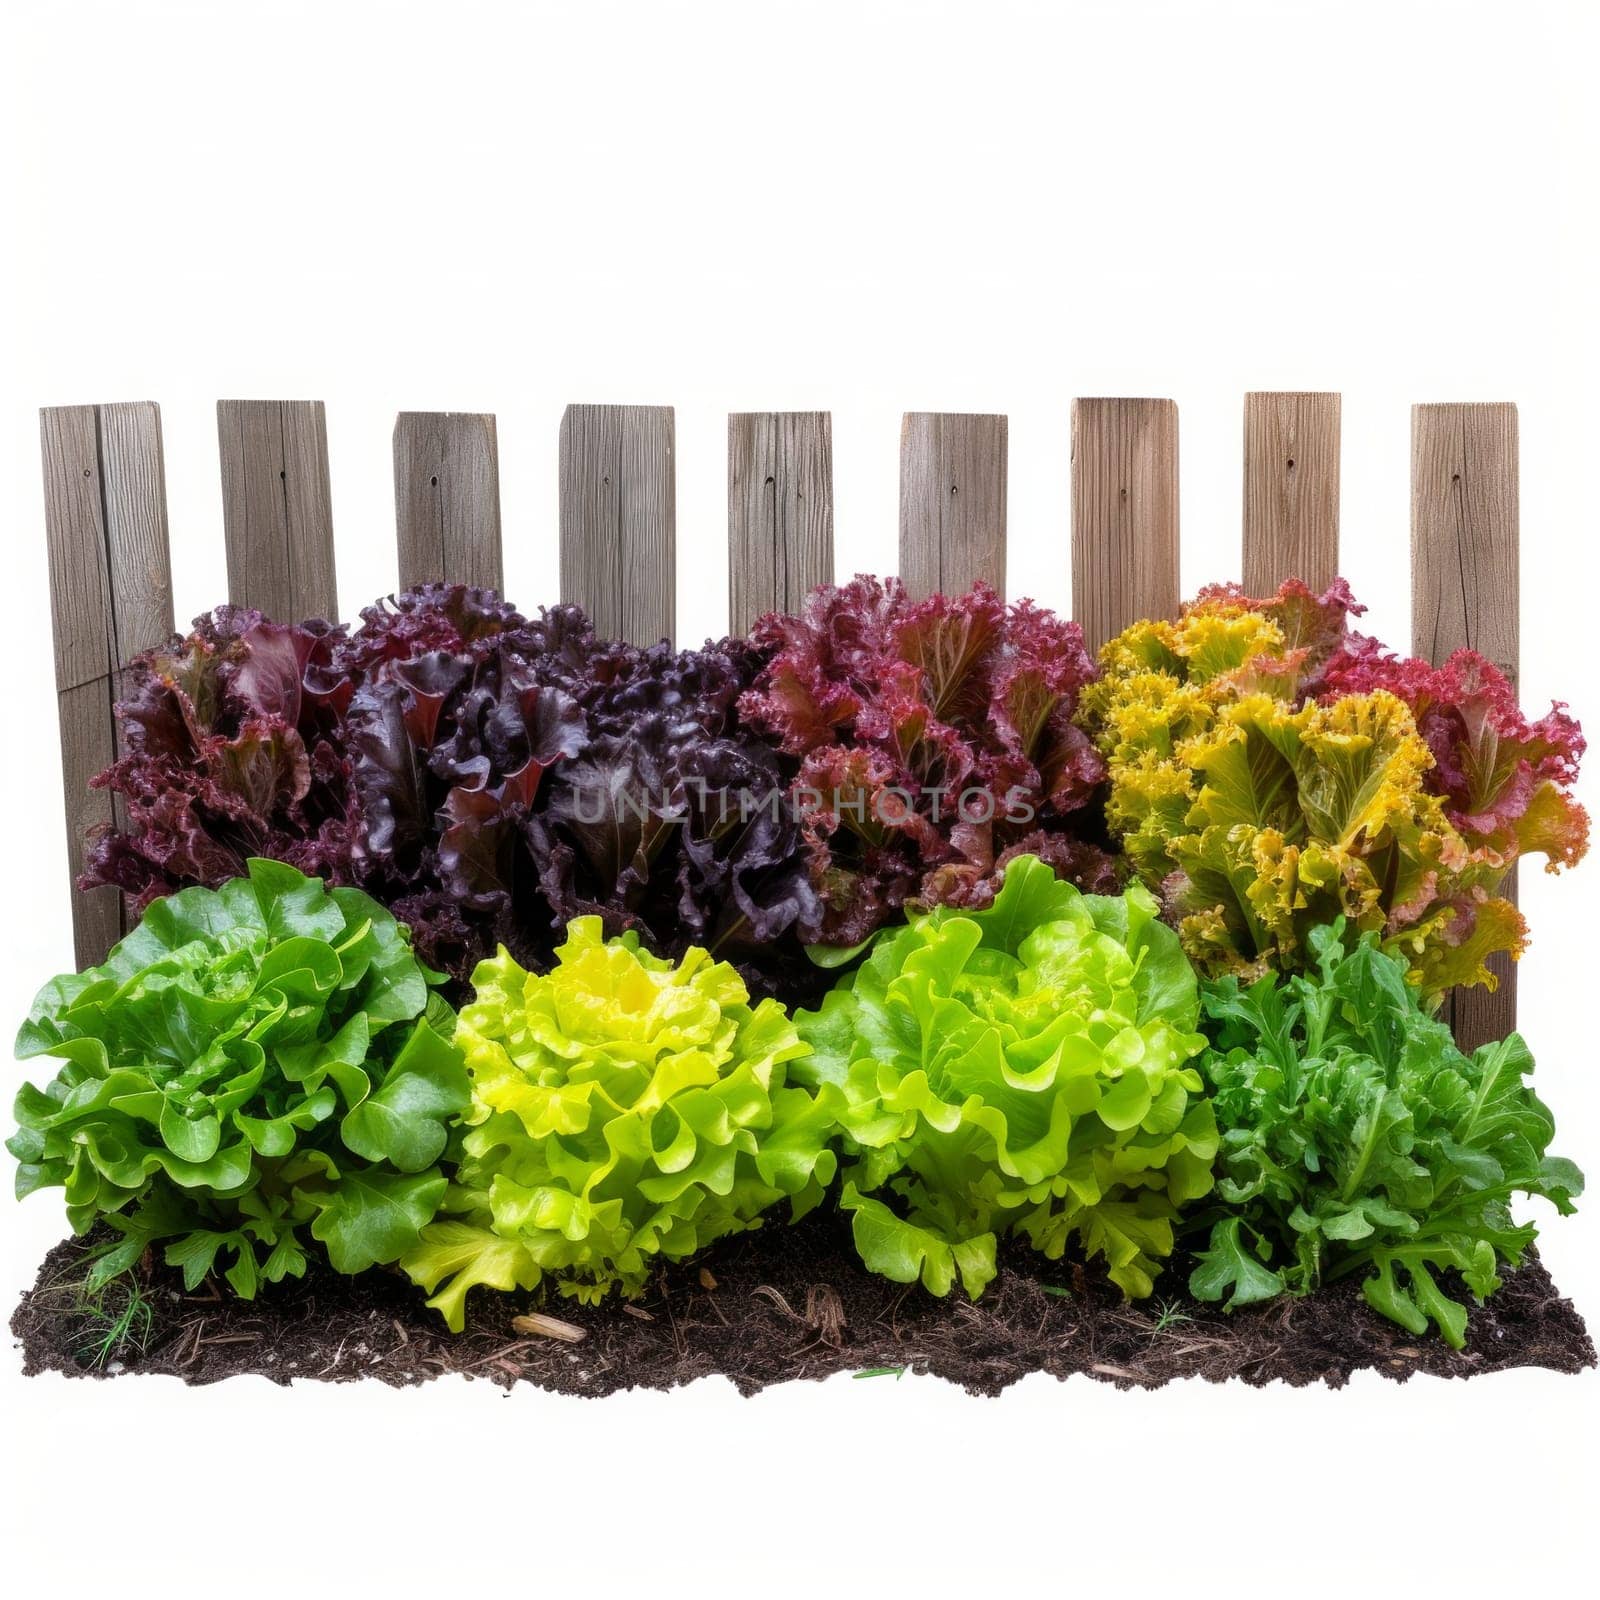 Small garden of colorful lettuce surrounded by a wooden fence, isolated, white background.